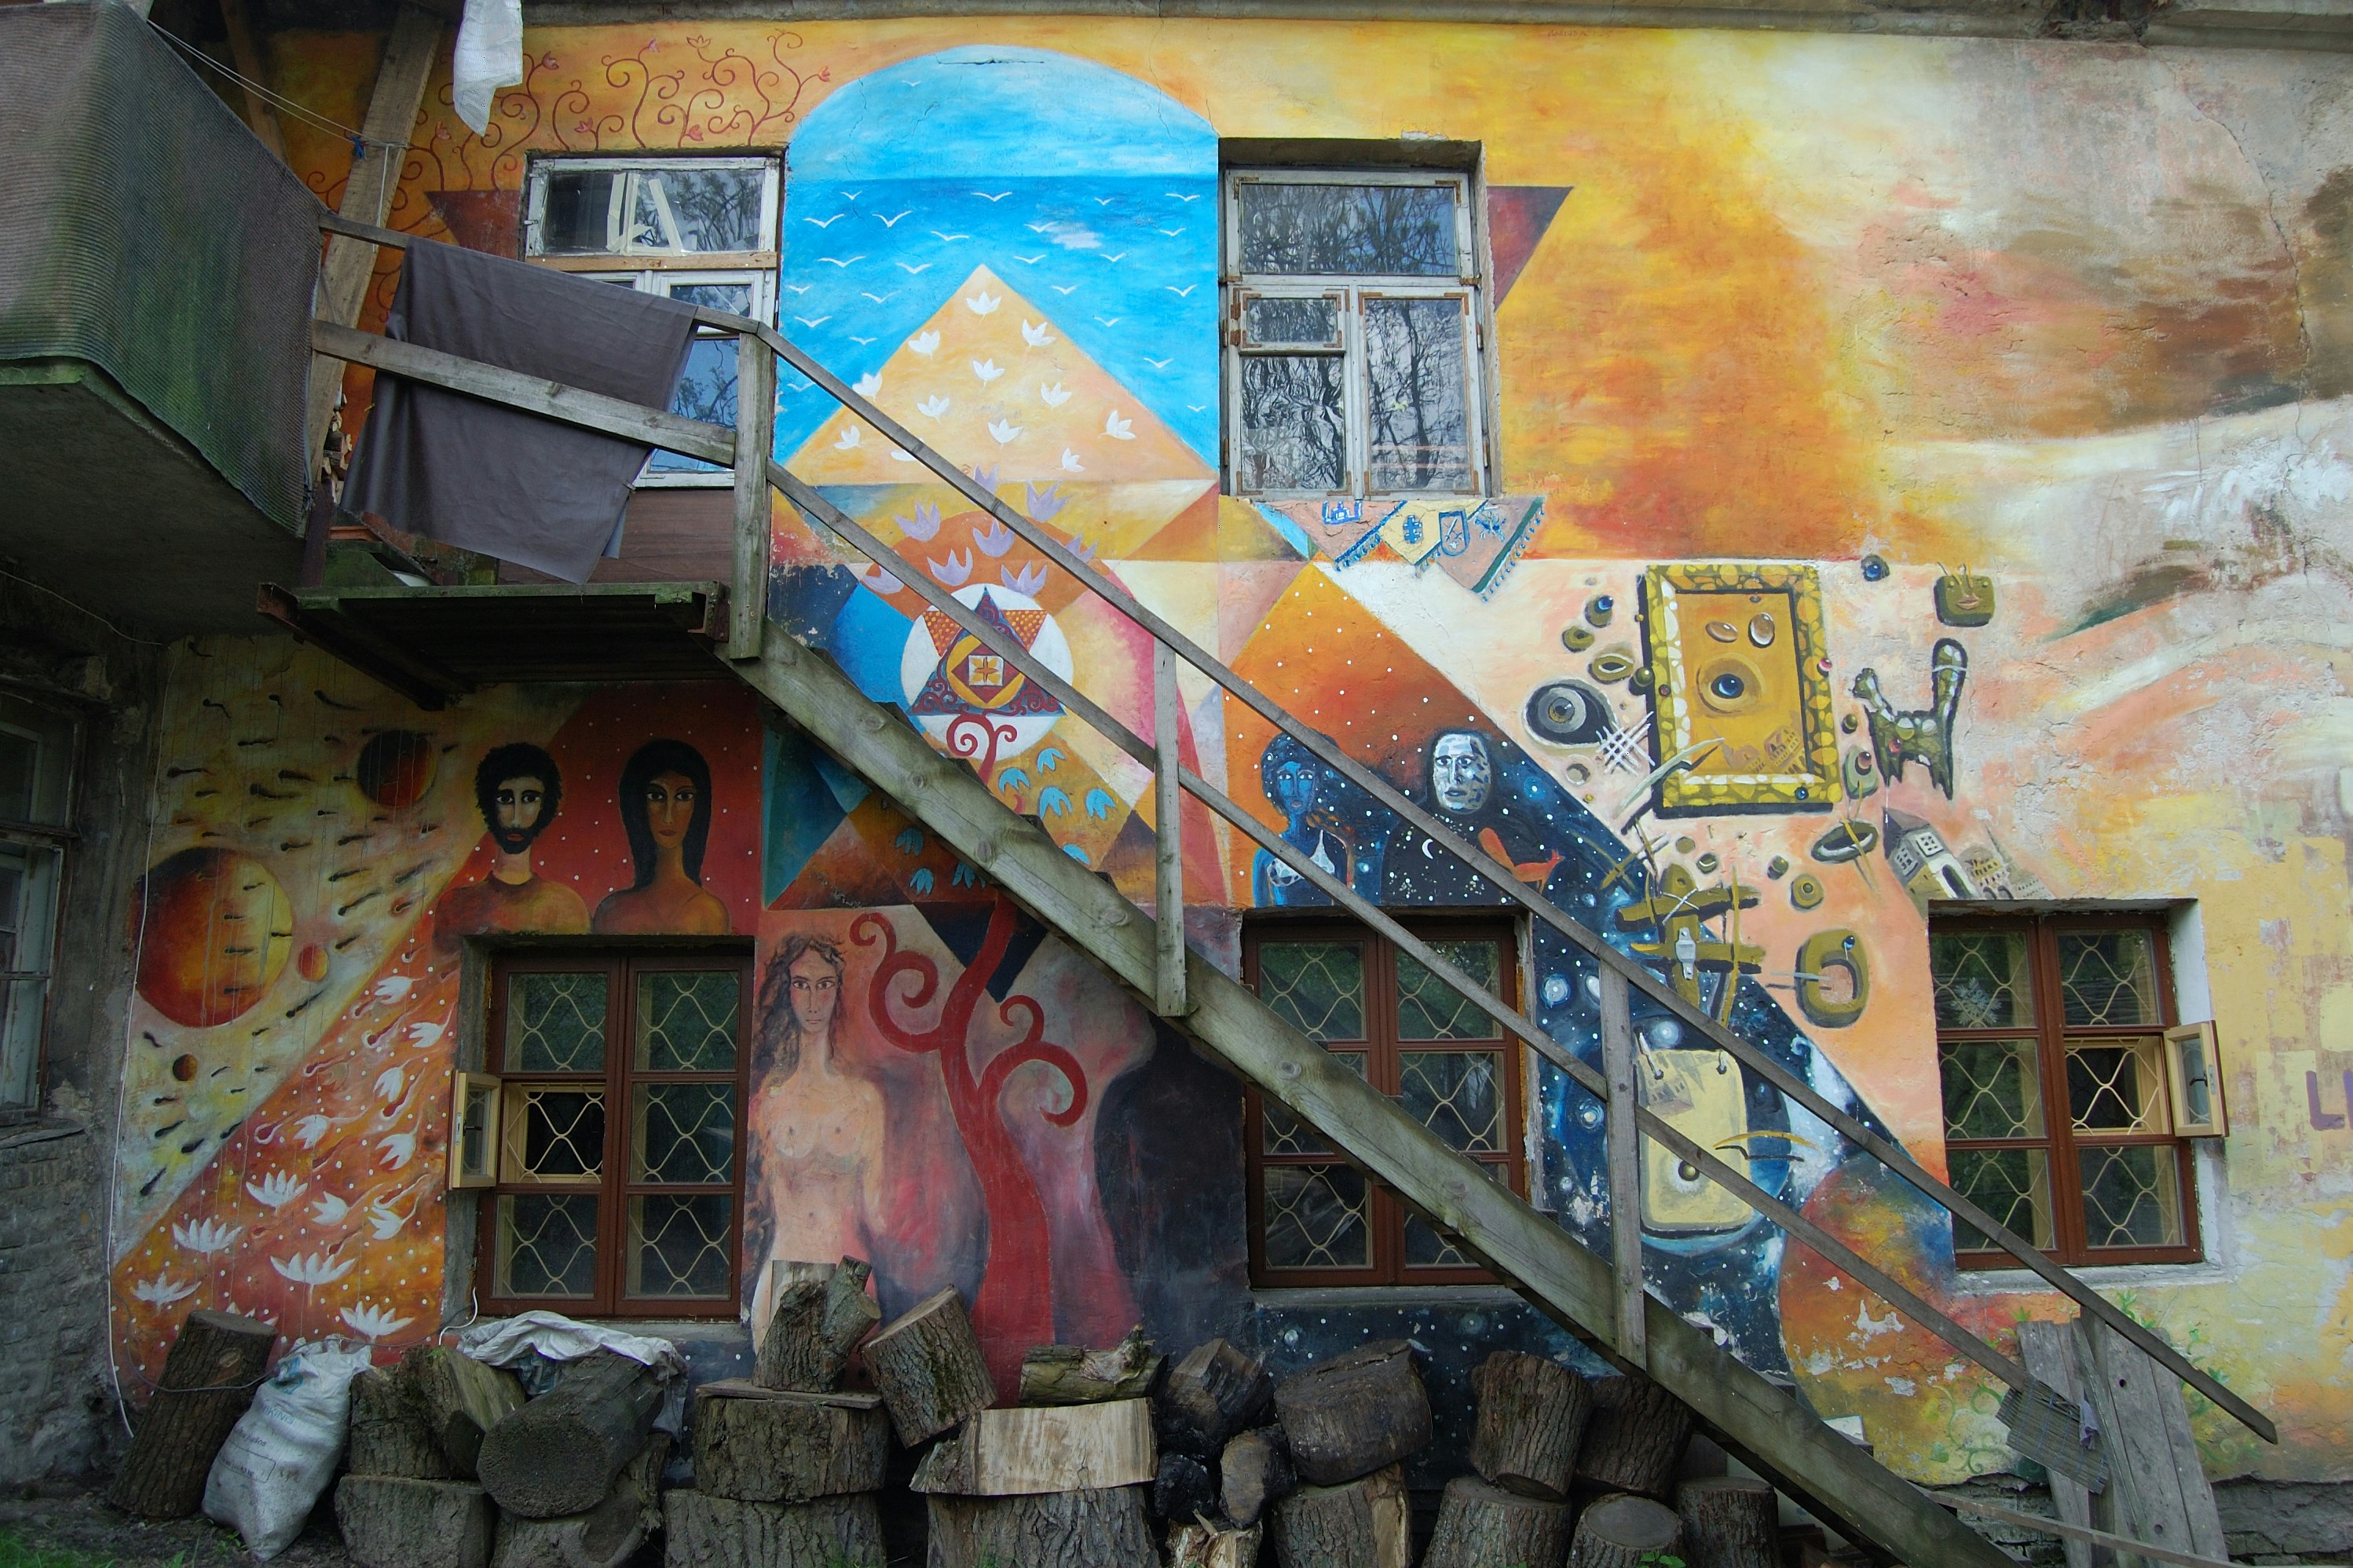 Bright murals adorning the walls of a building in the Užupis district